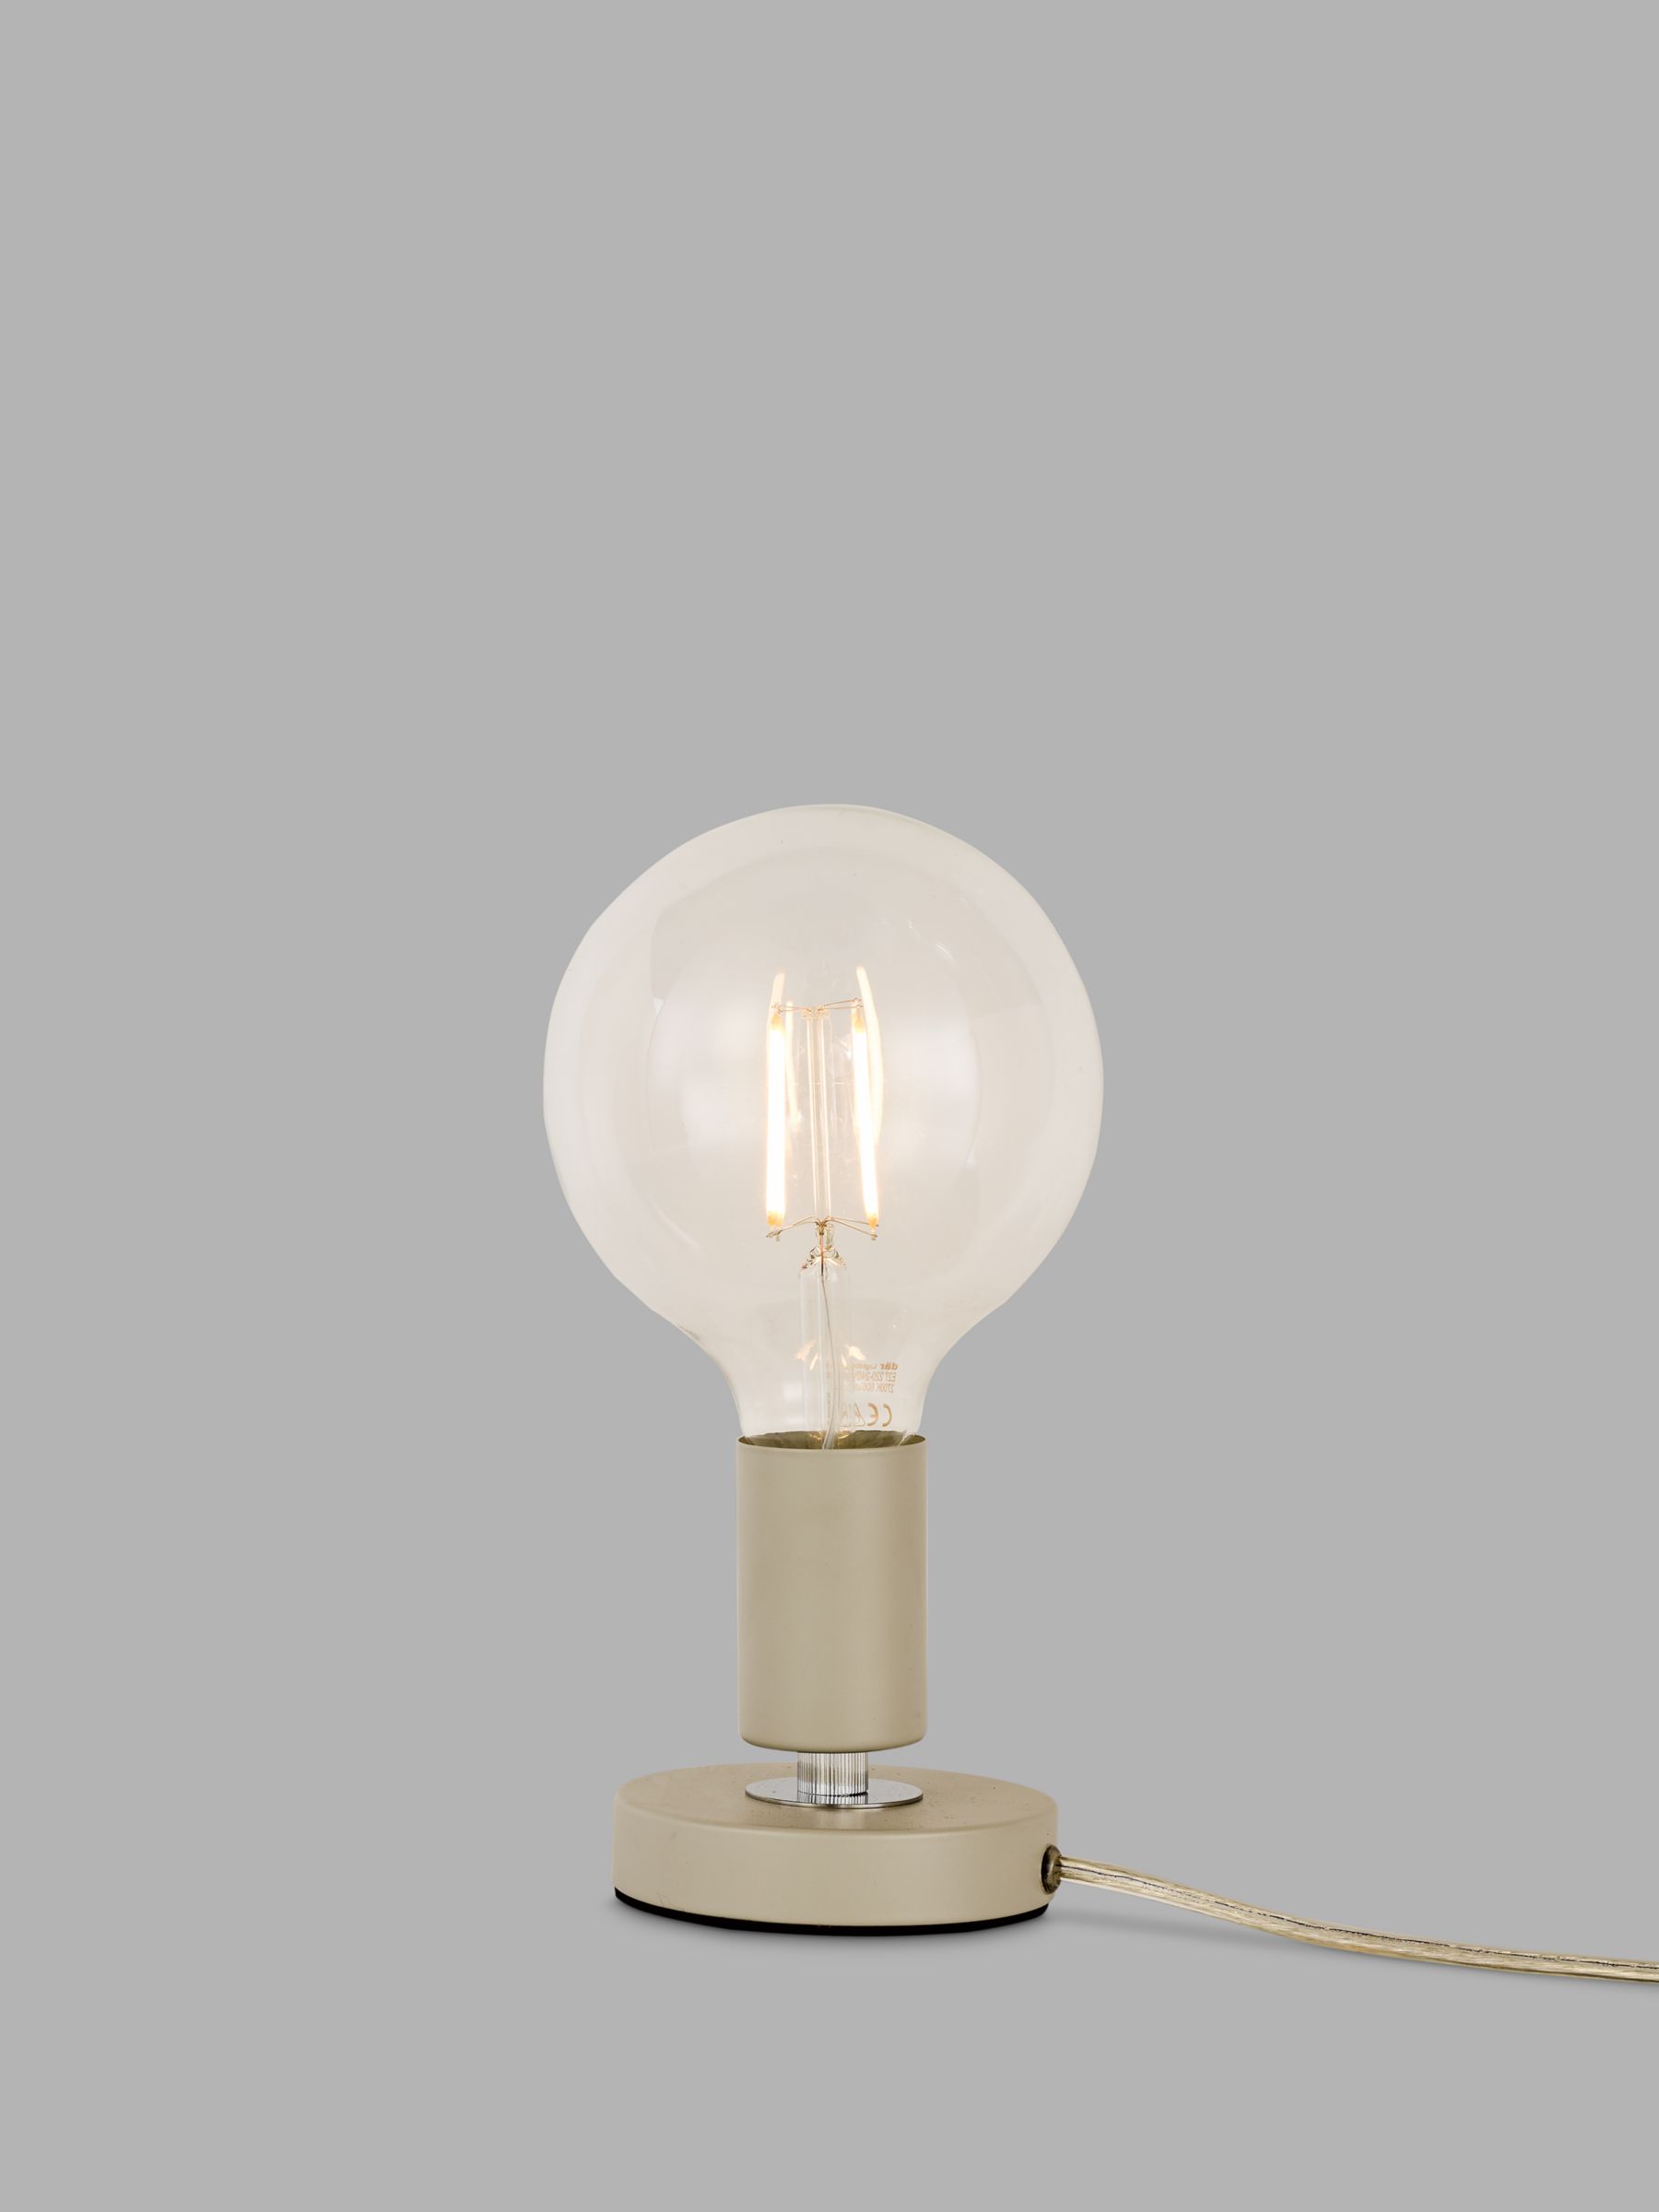 ANYDAY John Lewis & Partners Spoke Bulbholder Touch Table Lamp